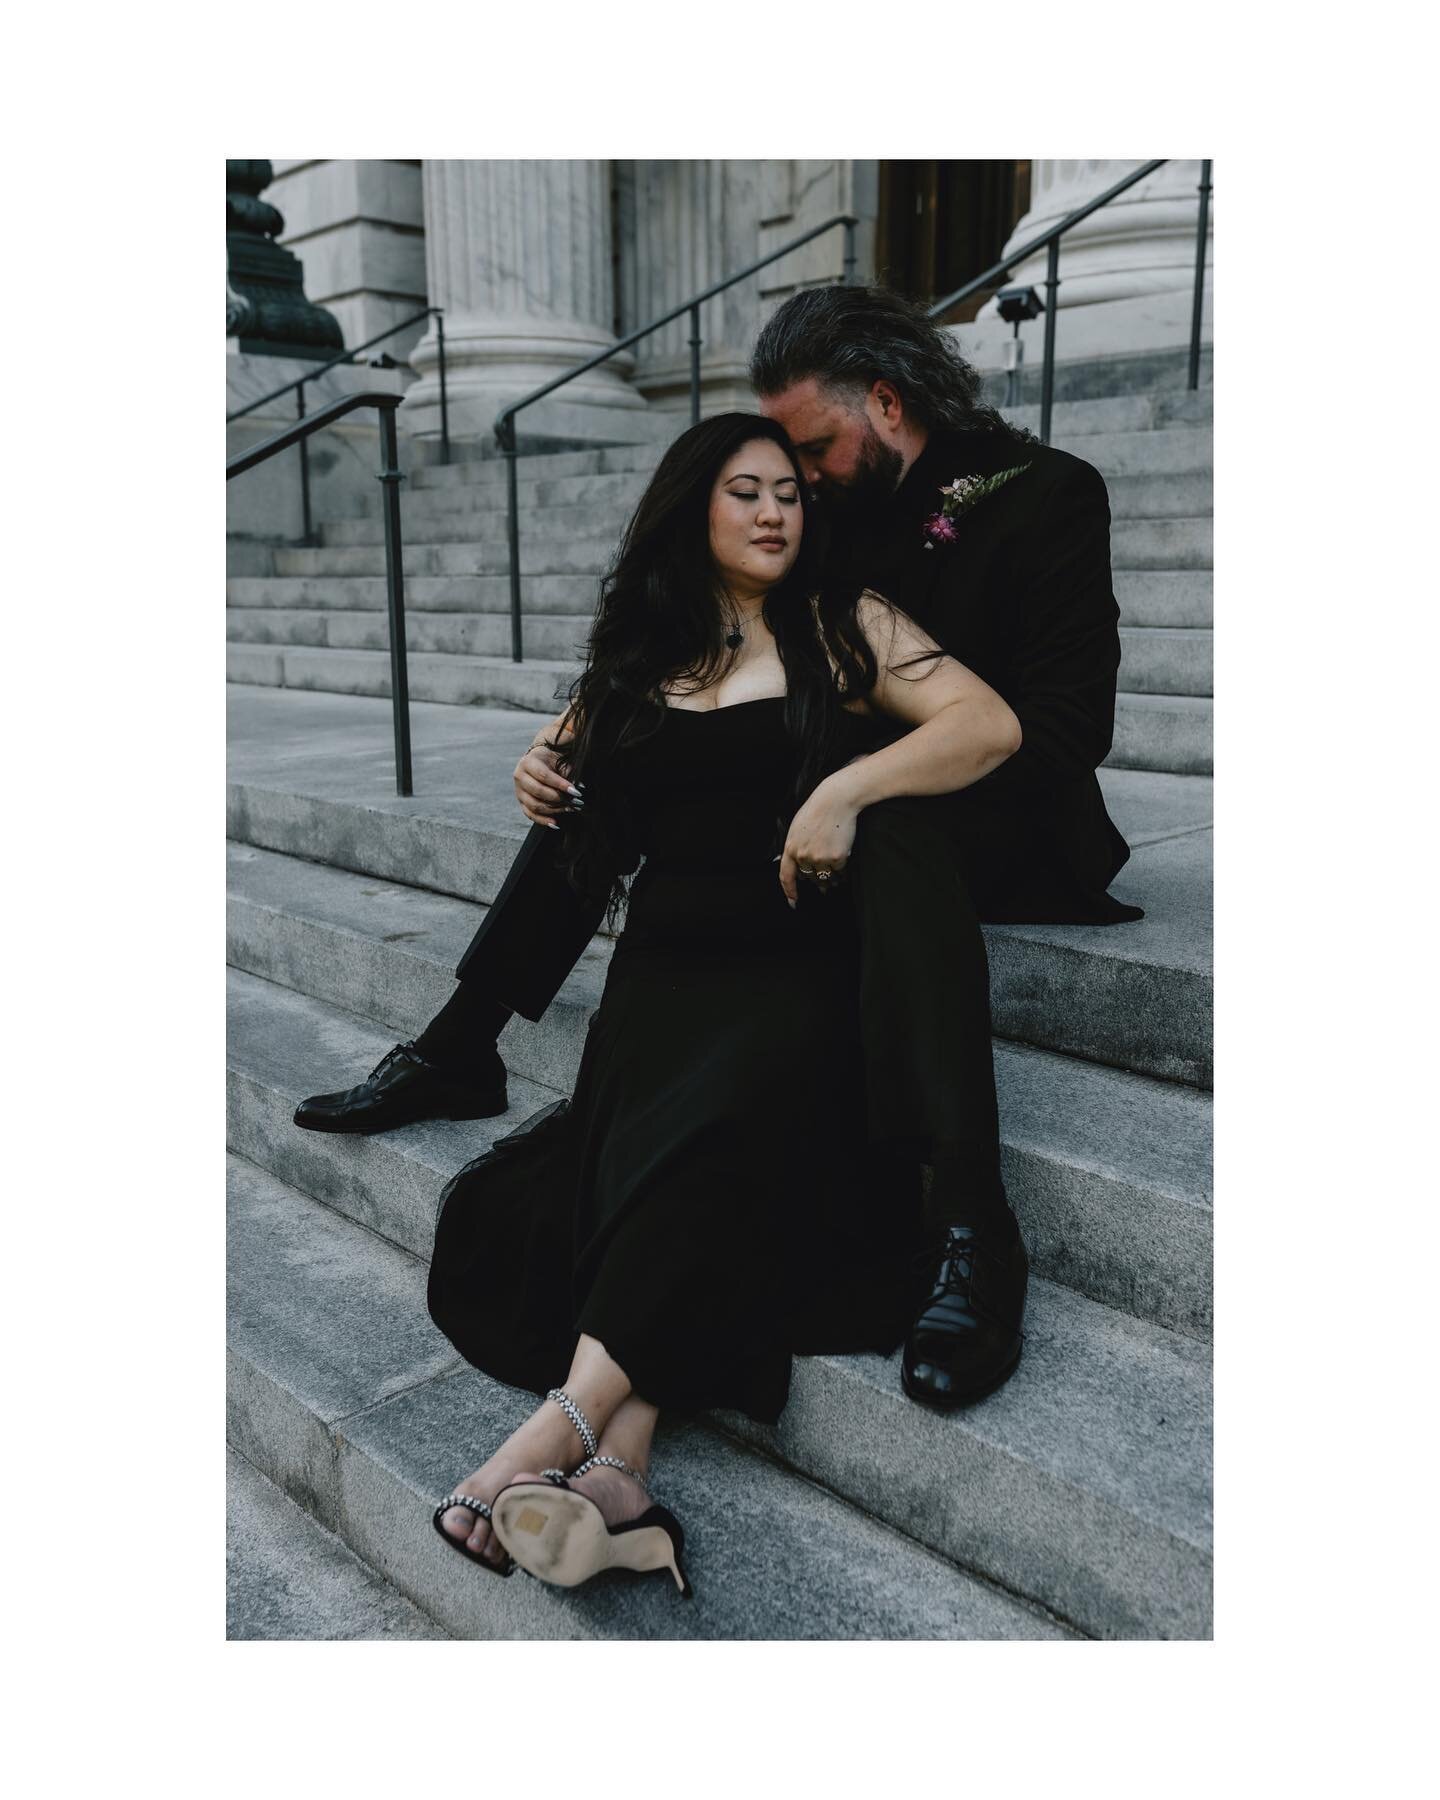 ✨🖤Welcome to goth meets glam with these sweet love birds who eloped in the fall 🖤✨

Don&rsquo;t be afraid to step out of the box. It is YOUR wedding after all 🖤🖤